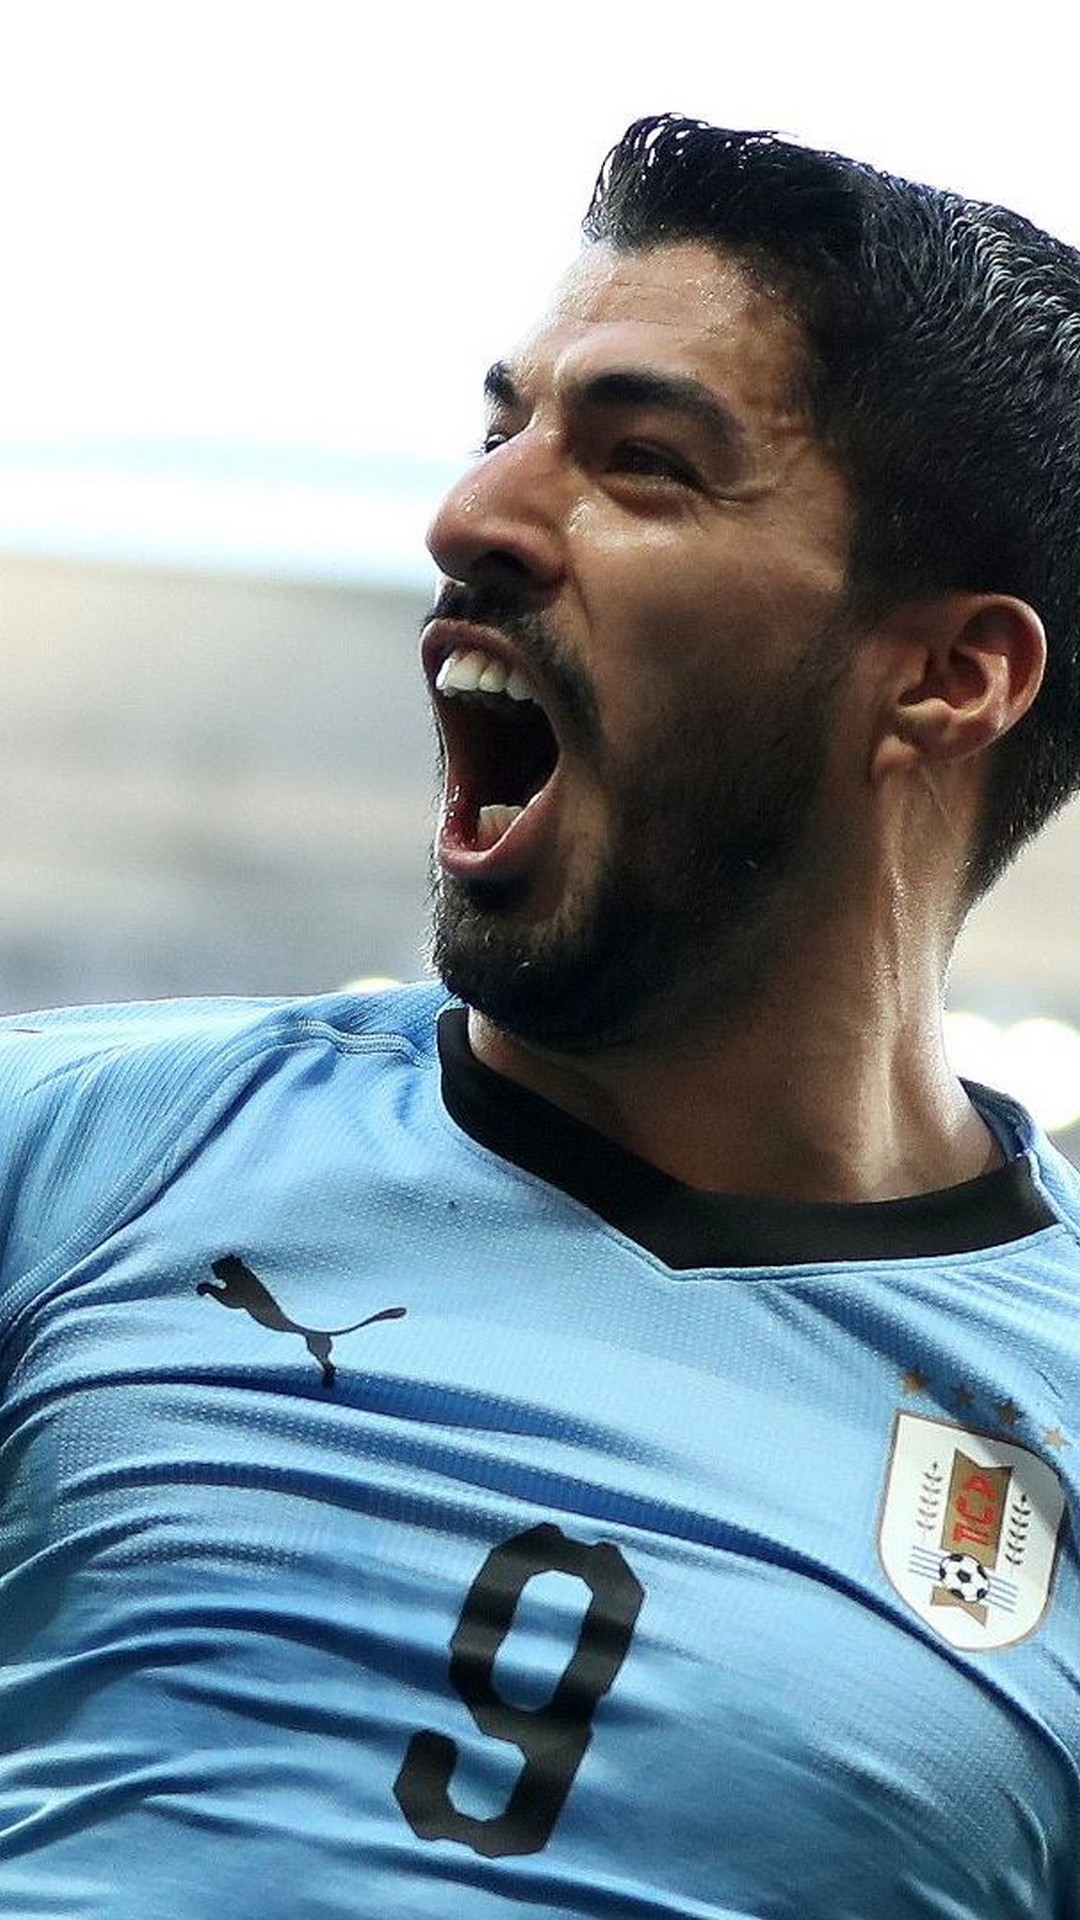 Luis Suarez Uruguay Wallpaper iPhone with resolution 1080X1920 pixel. You can make this wallpaper for your iPhone 5, 6, 7, 8, X backgrounds, Mobile Screensaver, or iPad Lock Screen